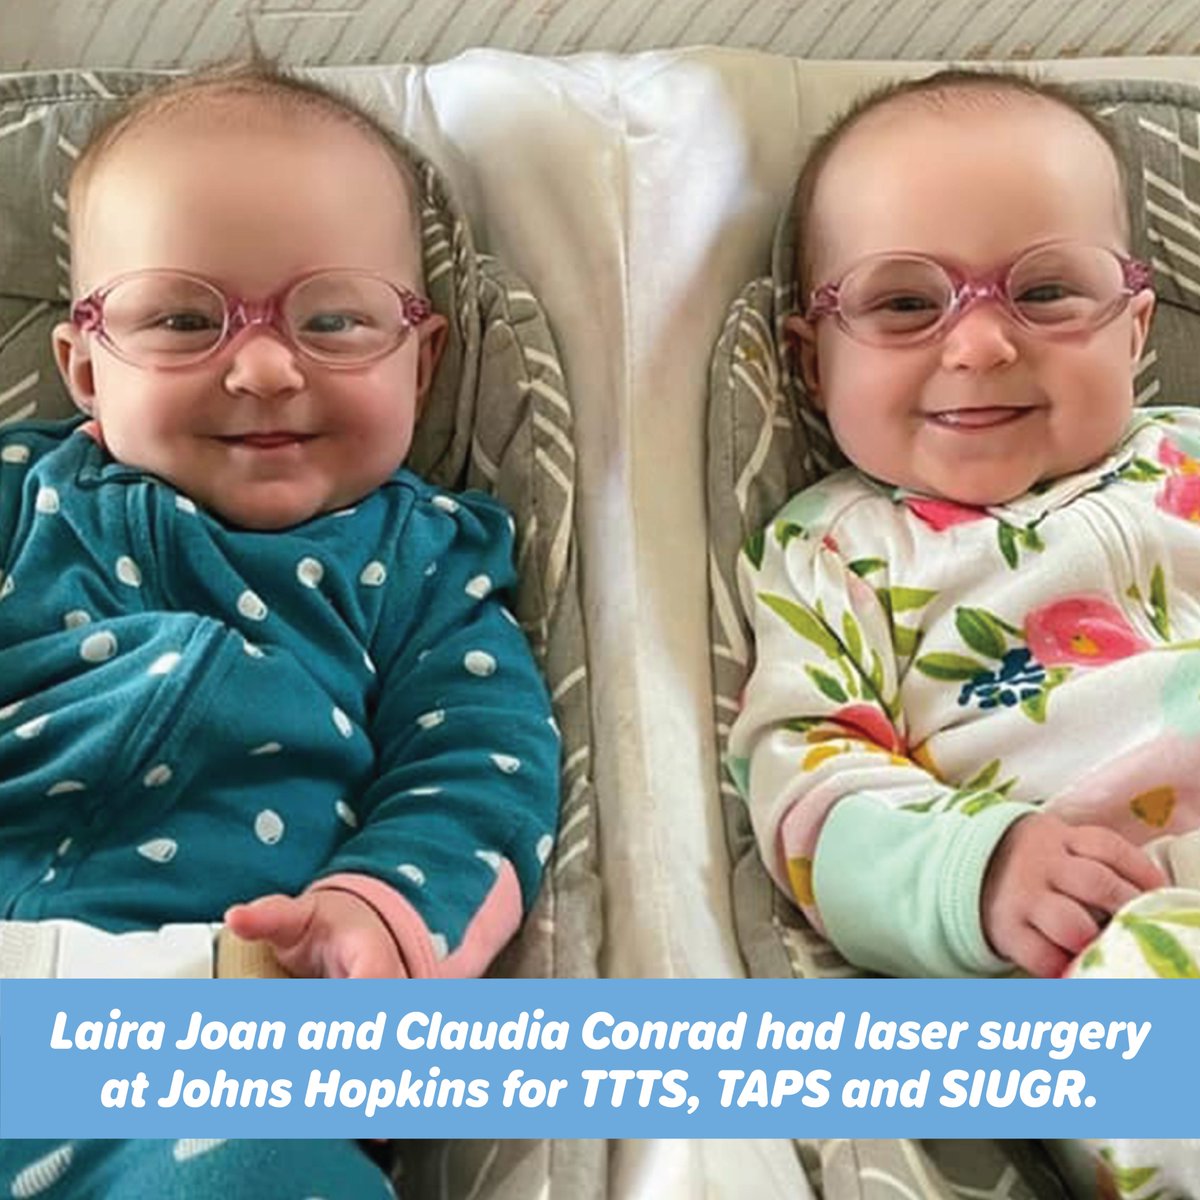 #tttsfoundation Medical Advisory Board Member Dr. Ahmet Baschat works with tttsfoundation.org to save #twins #triplets! #Monoamniotic #Monochorionic twins Laira Joan and Claudia Conrad survive #TTTS #SIUGR #twinanemiapolycythemiasequence after surgery with @drjenamiller!